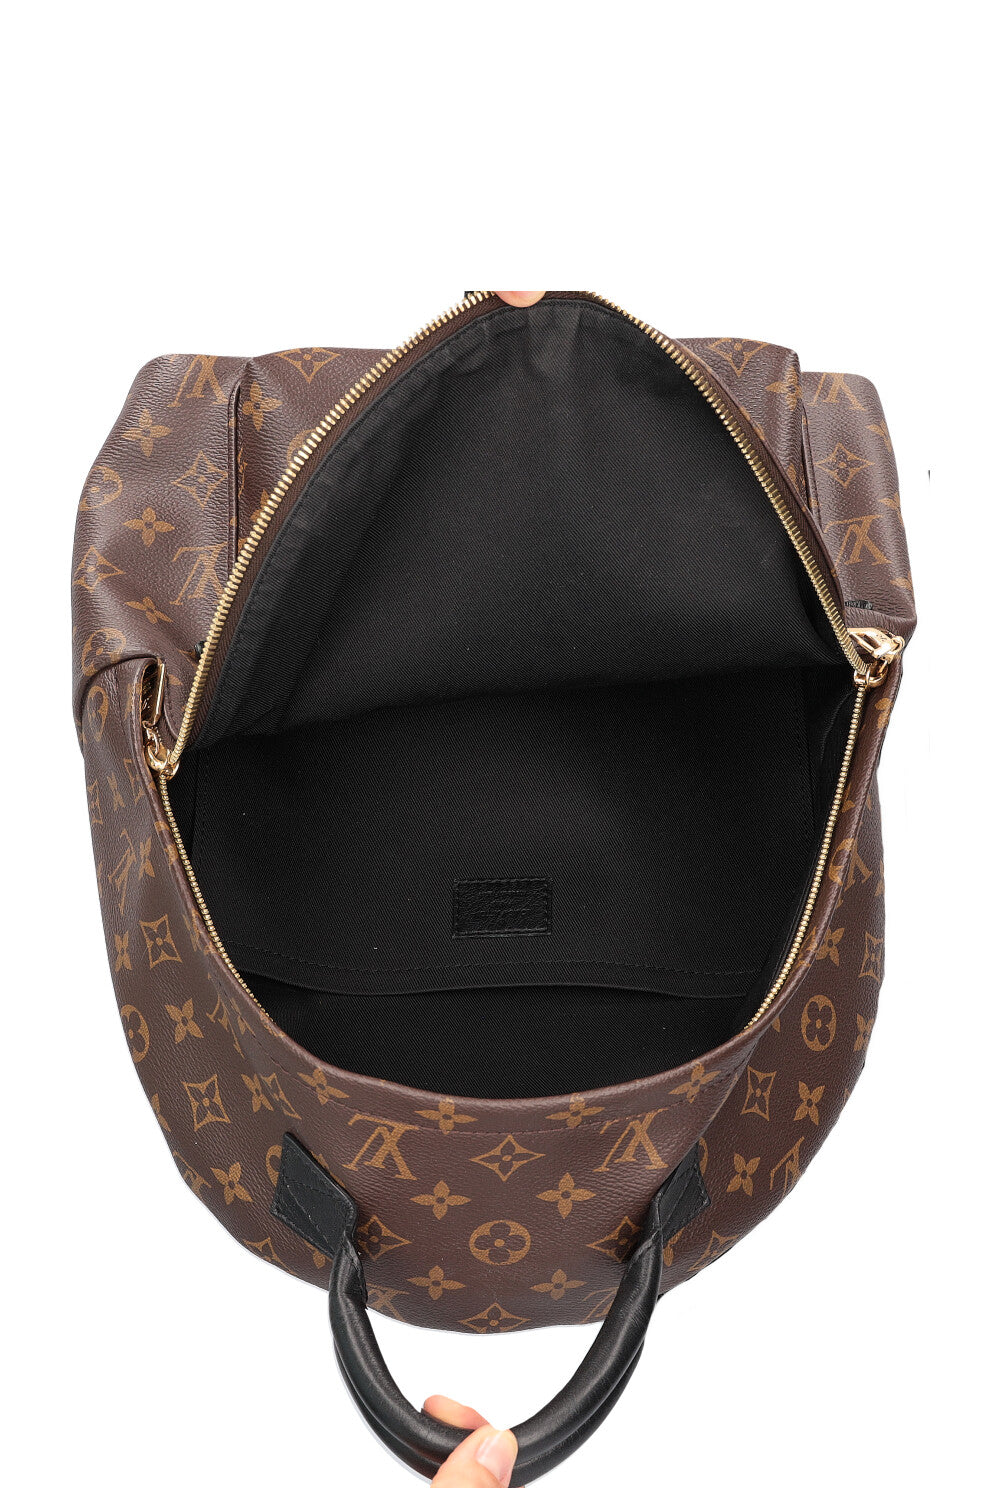 LOUIS VUITTON Palm Springs MM Backpack MNG